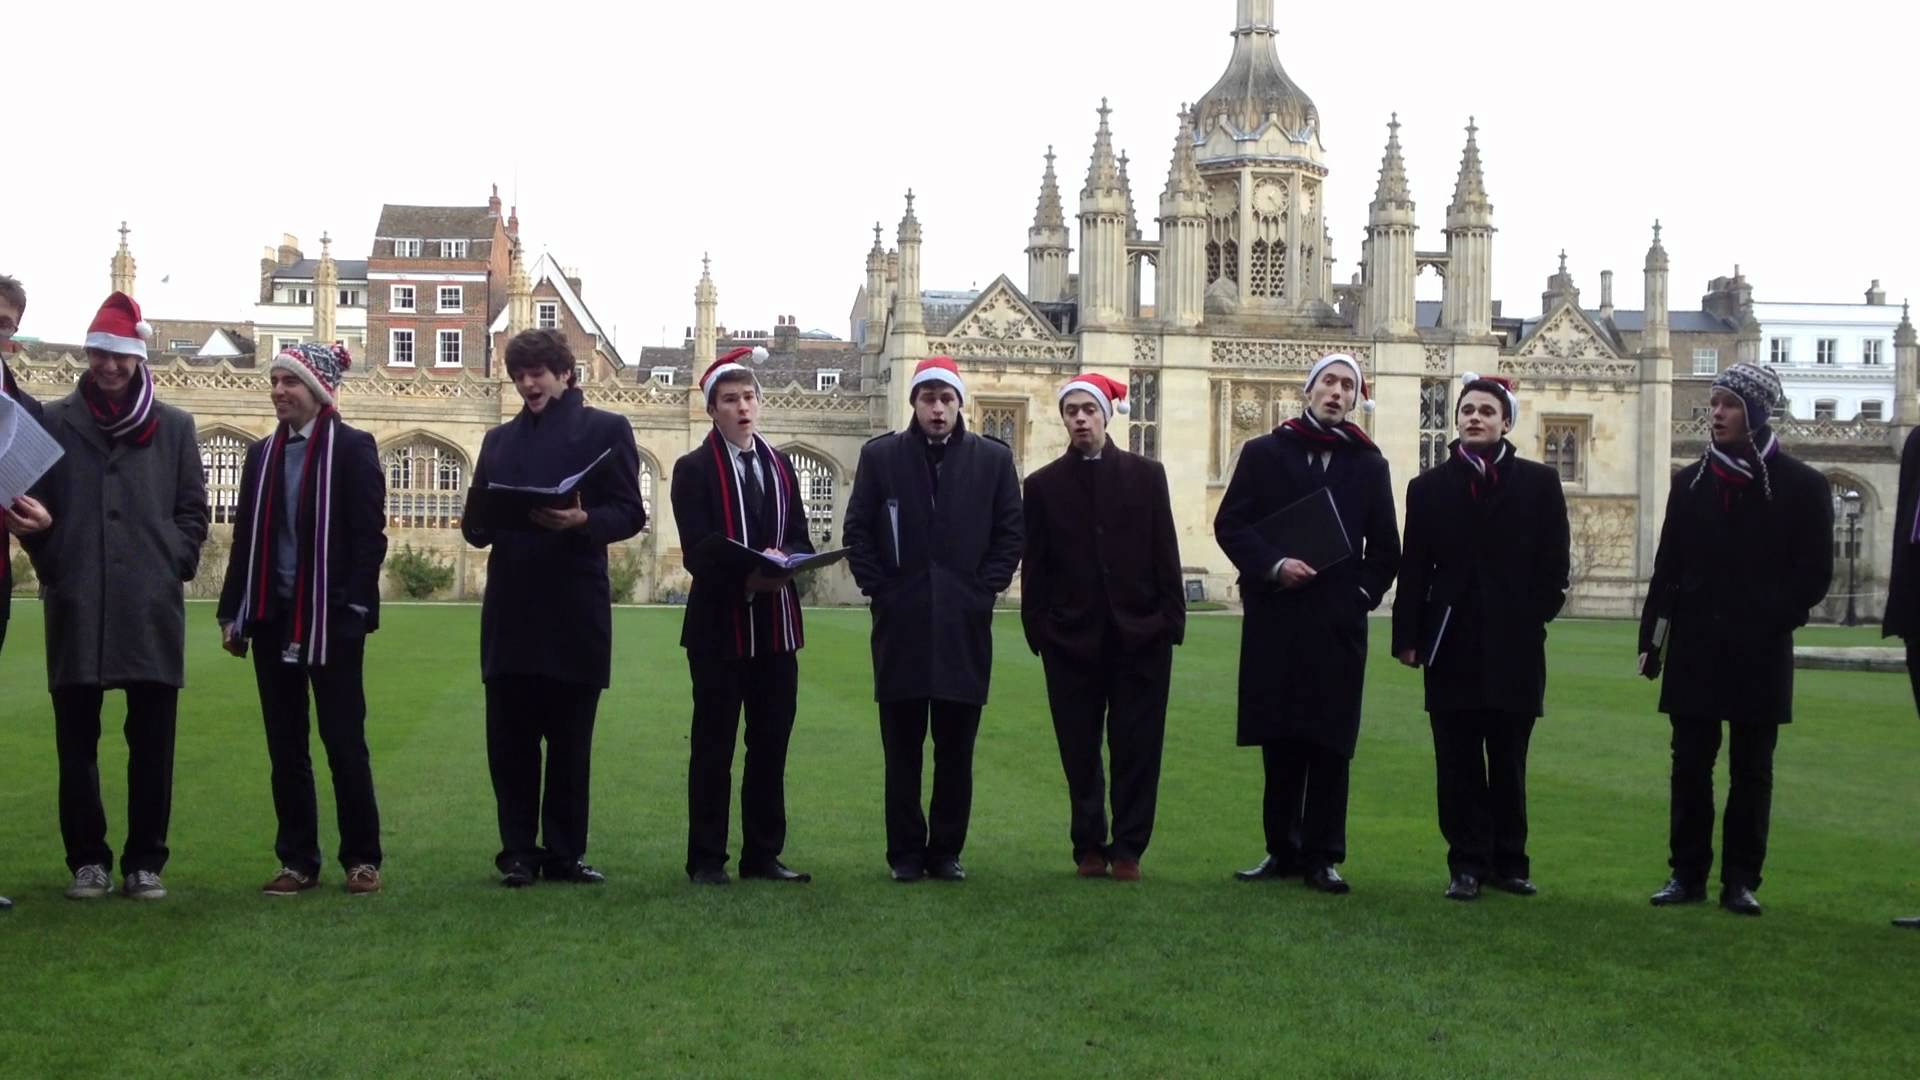 Members of King's College Choir are feeling festive in their holiday hats